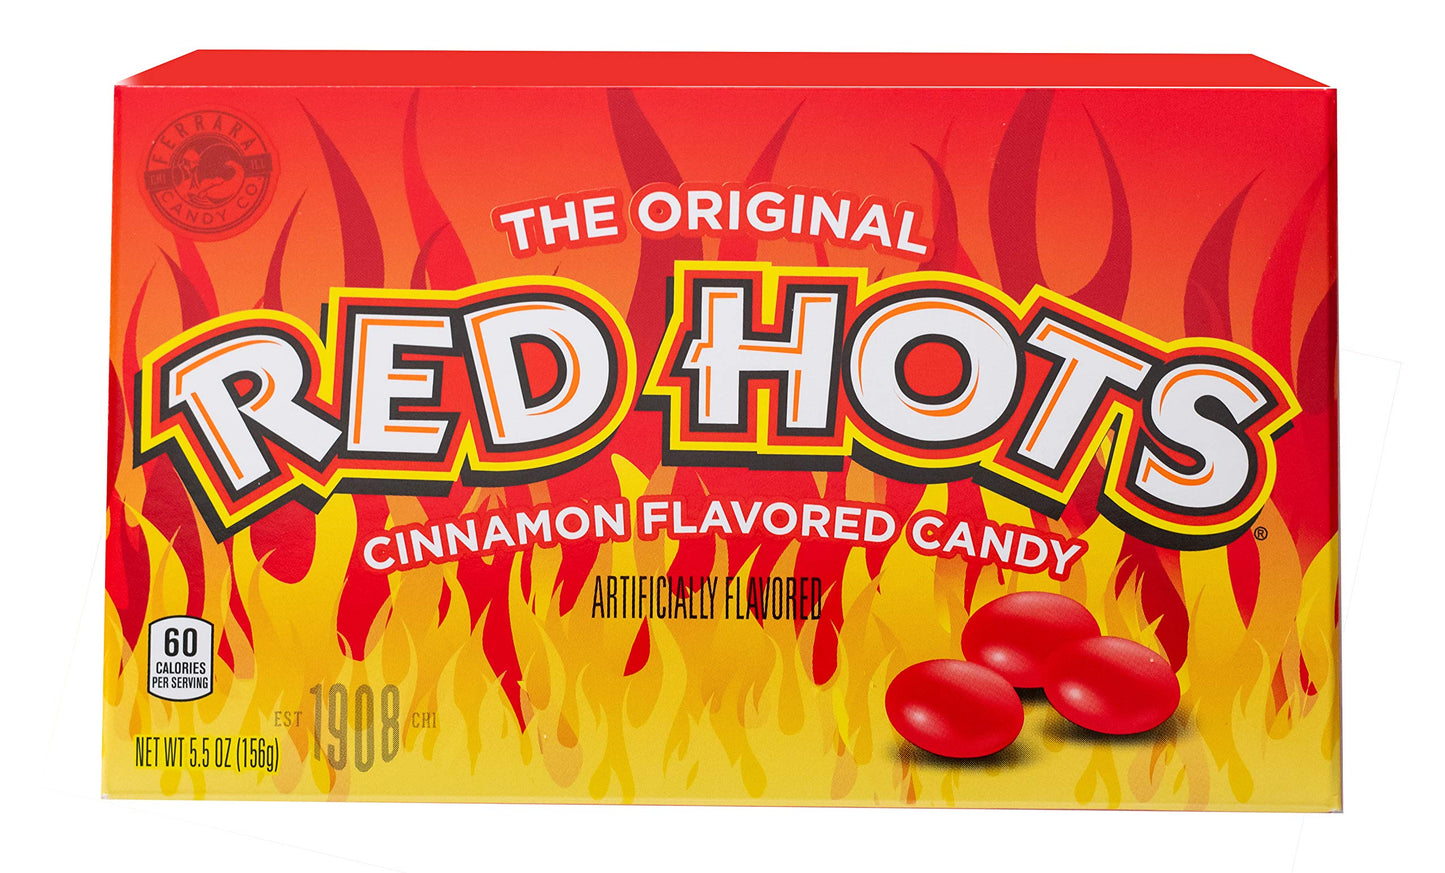 Red Hots Theater Box